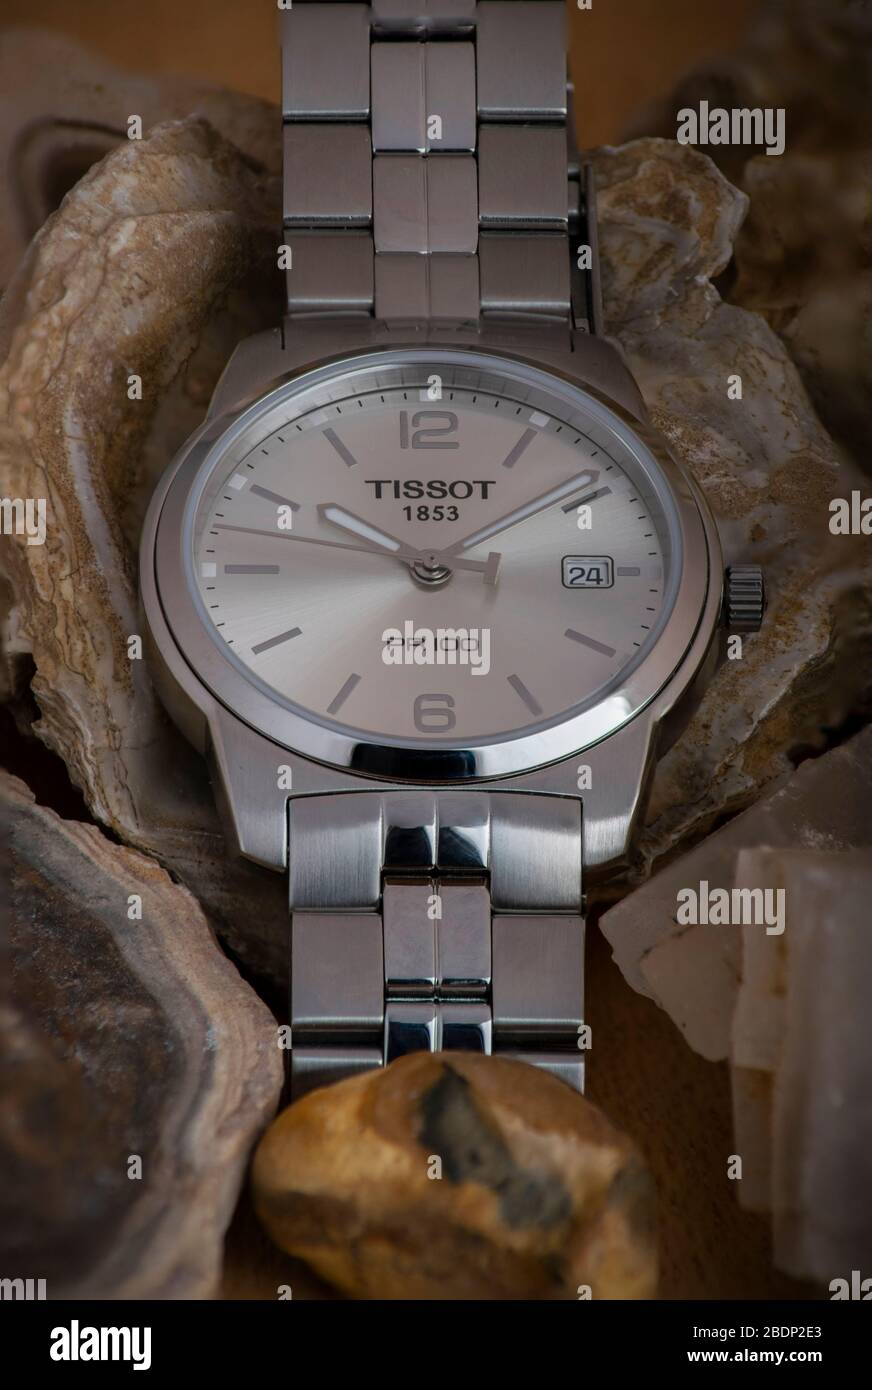 Alexandria, Egypt March 3, 2020 Tissot classic watch advertising with fossils background Stock Photo